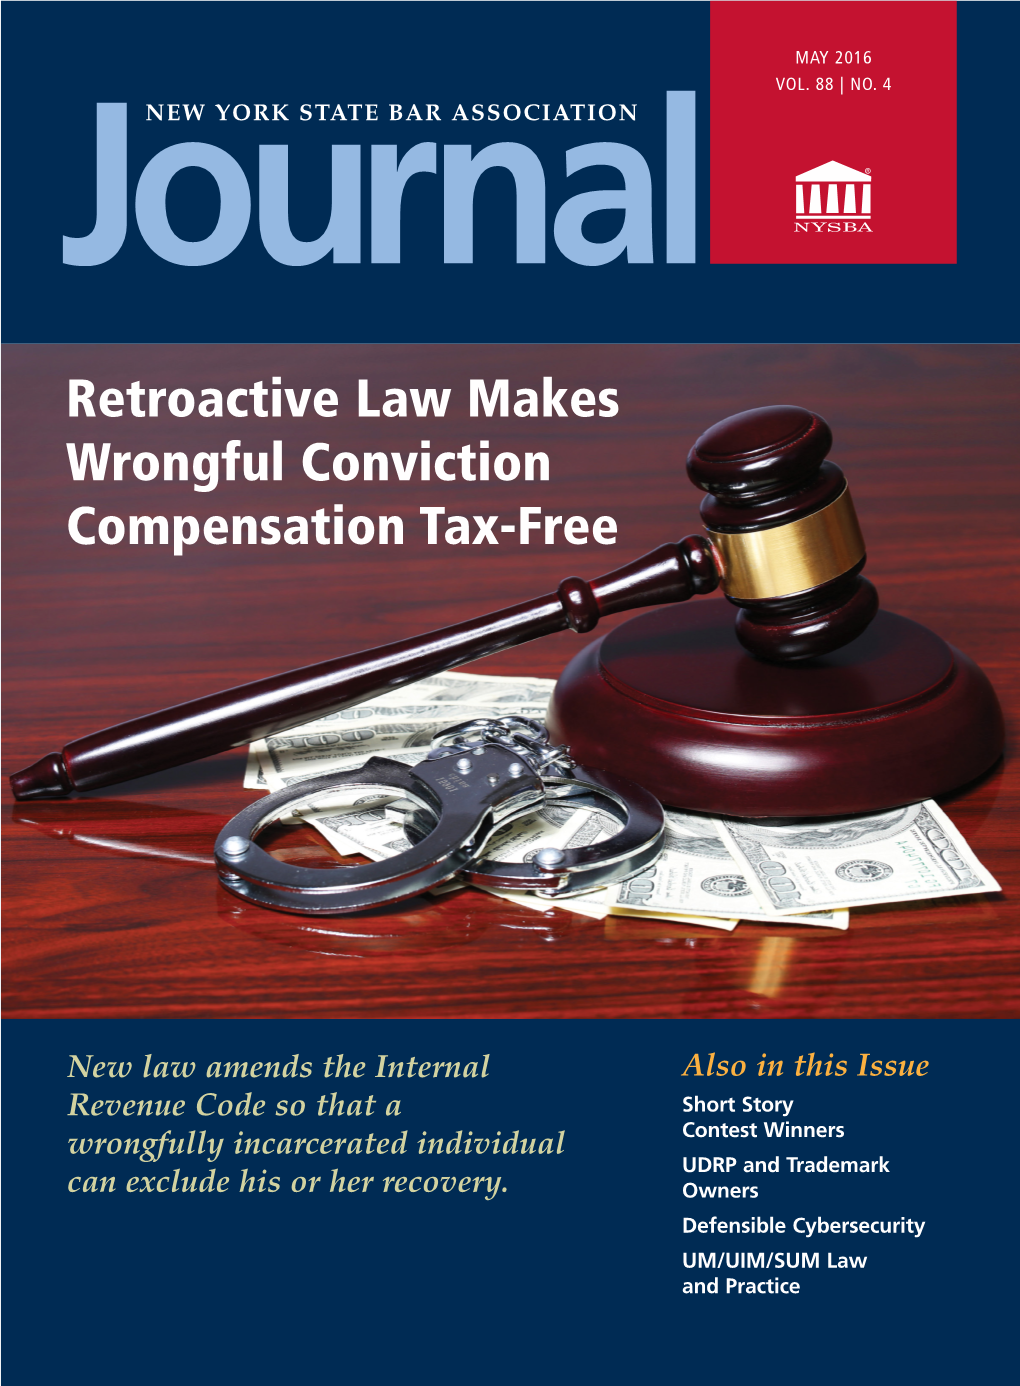 Retroactive Law Makes Wrongful Conviction Compensation Tax-Free